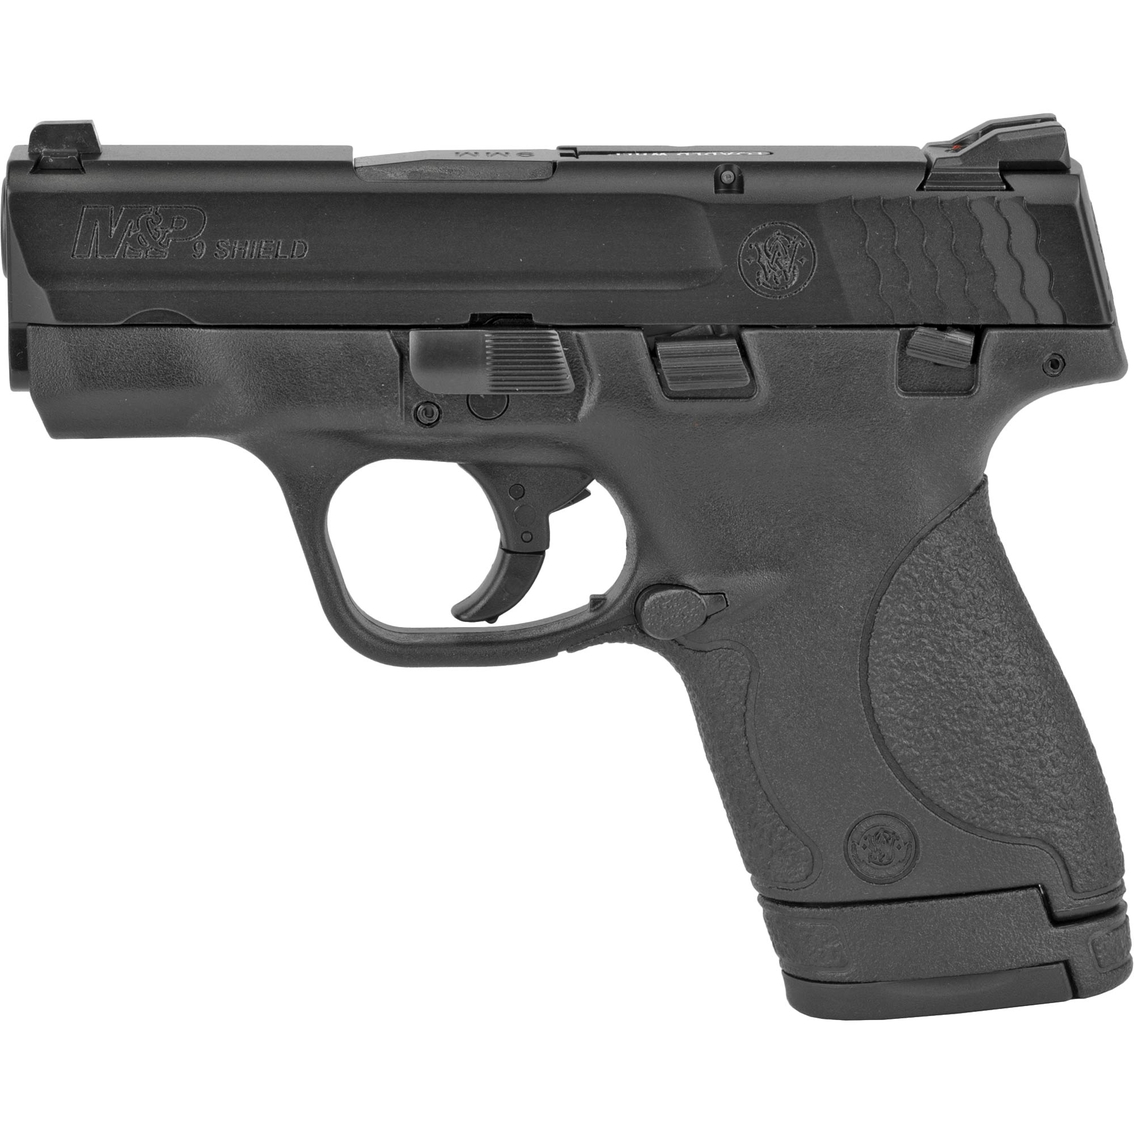 S&W Shield 9MM 3.1 in. Barrel 8 Rds 2-Mags Pistol Black with Thumb Safety - Image 2 of 3